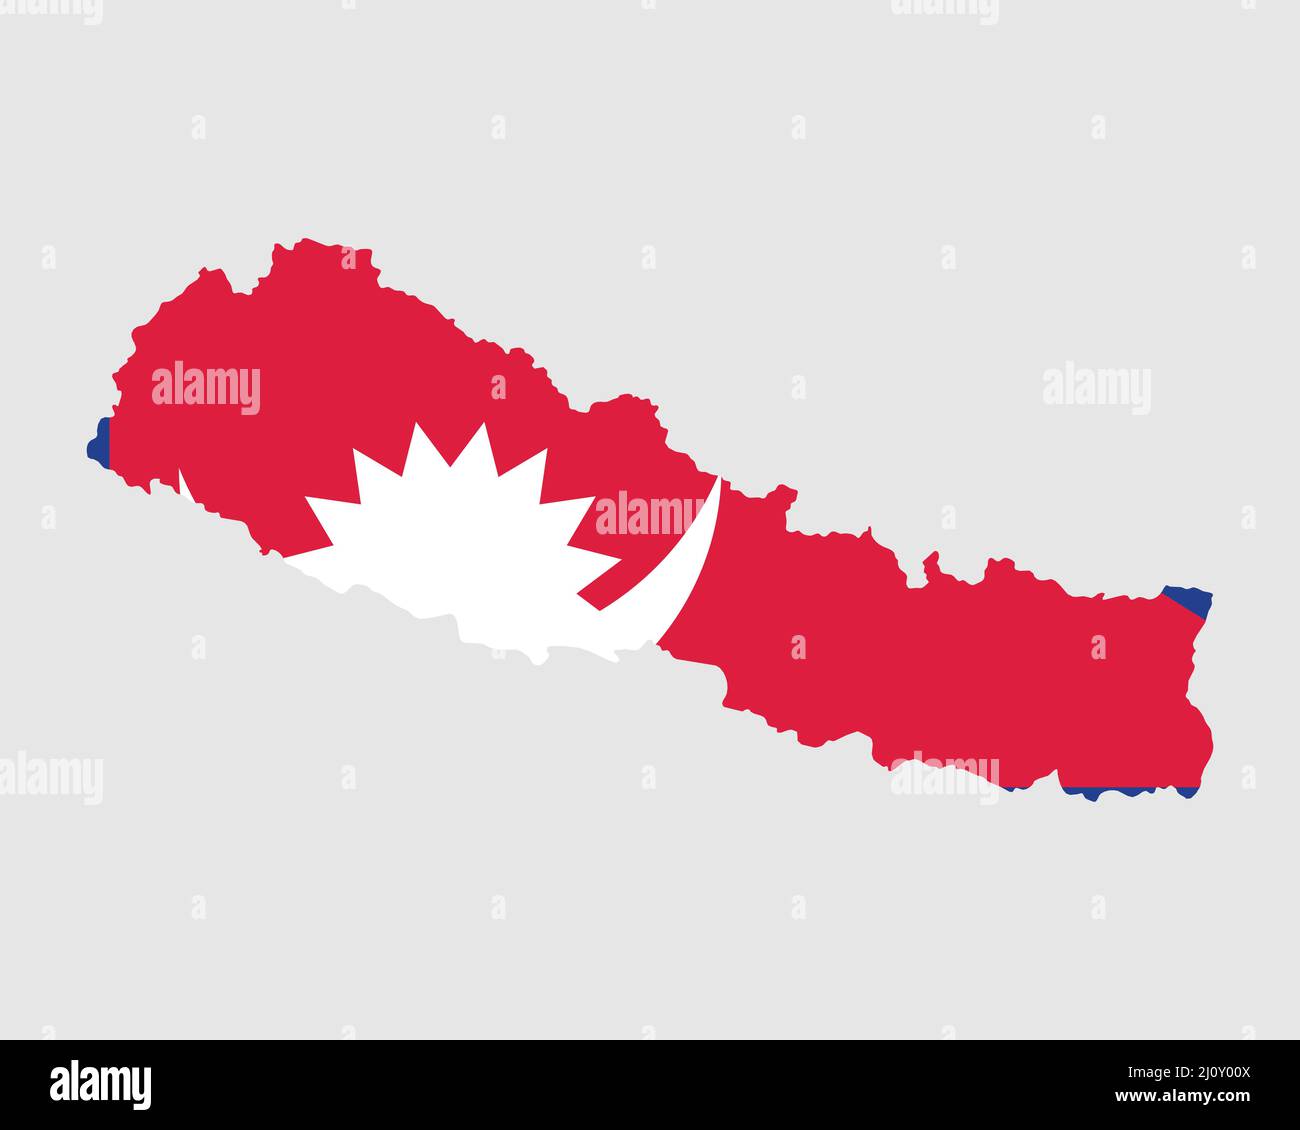 Nepal Flag Map. Map of the Federal Democratic Republic of Nepal with the Nepalese country banner. Vector Illustration. Stock Vector